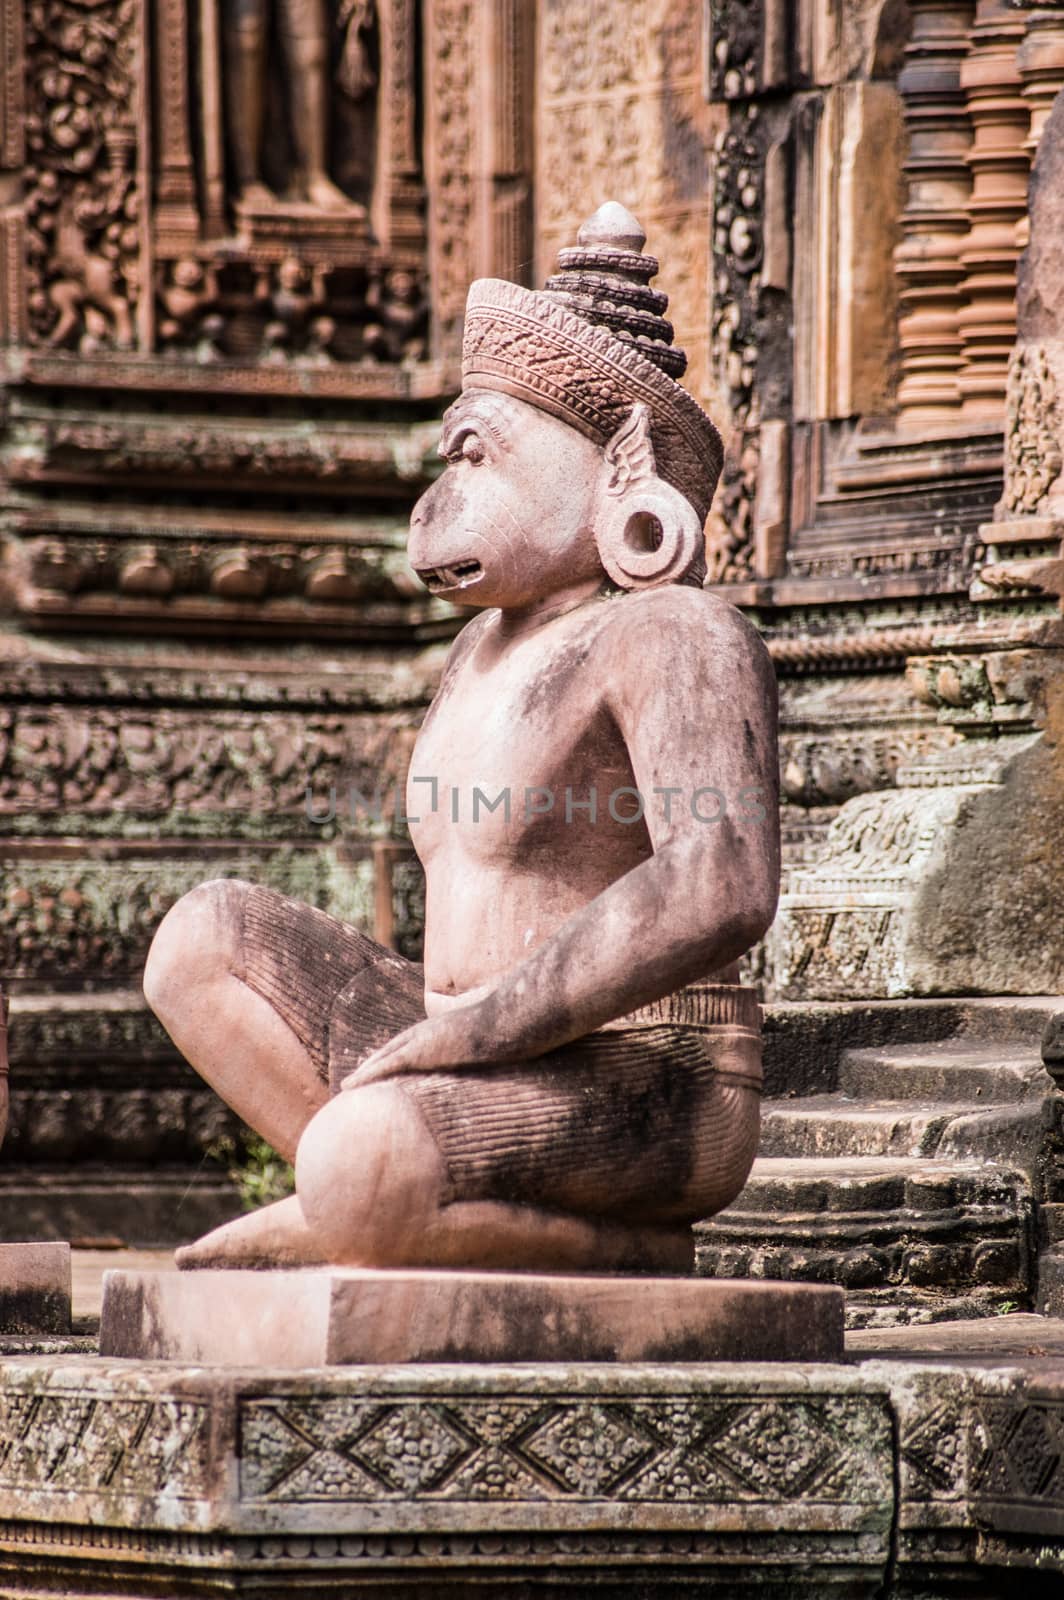 Ancient Khmer carved statue of a monkey soldier, part of Hanuman's army, guarding a prasat chapel at Banteay Srei Temple, Angkor, Cambodia.